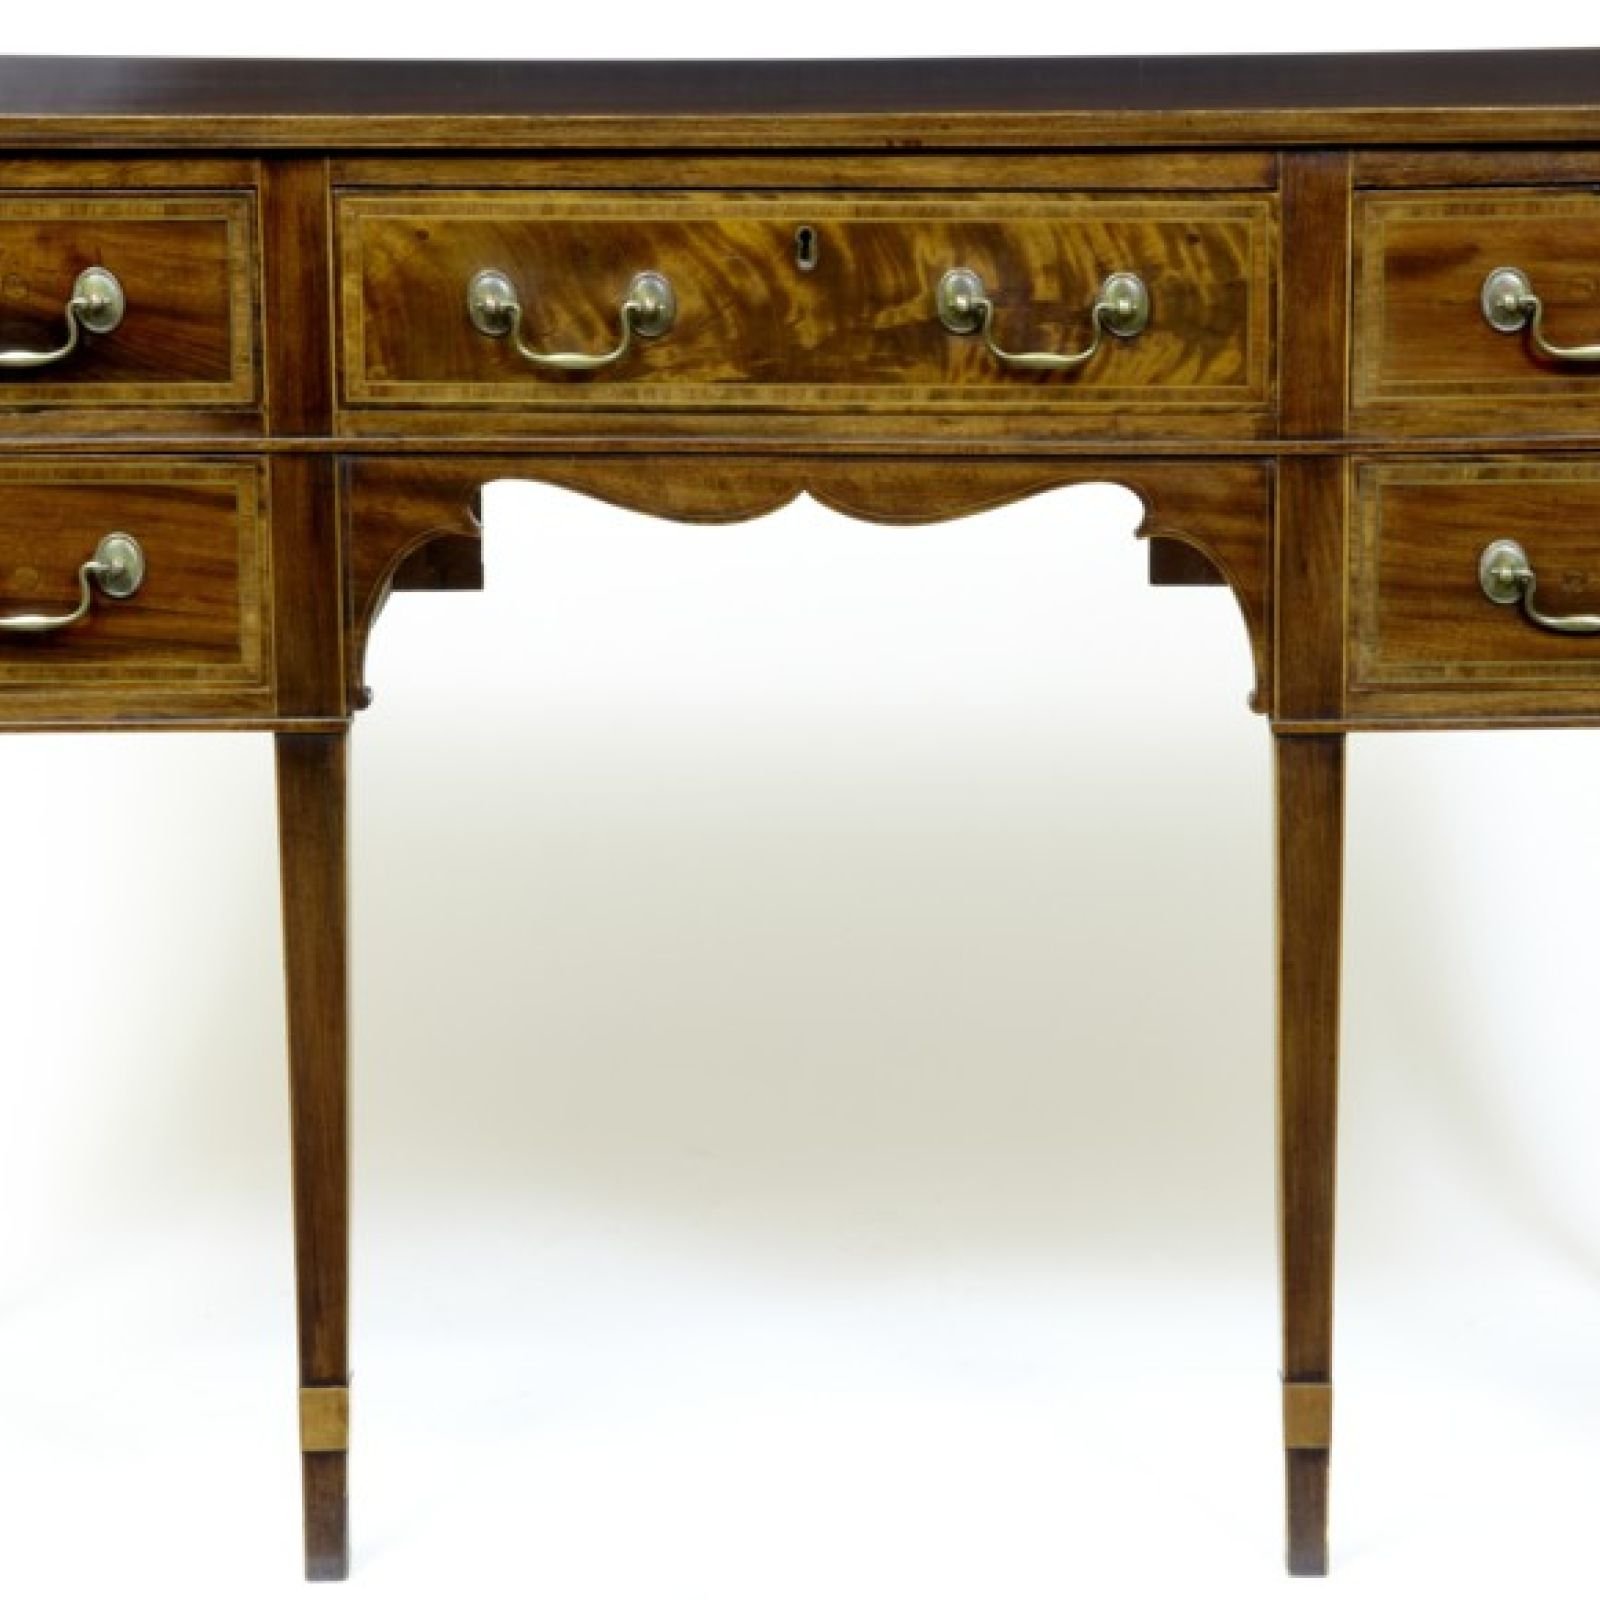 19th Century inlaid mahogany sideboard with secretaire drawer